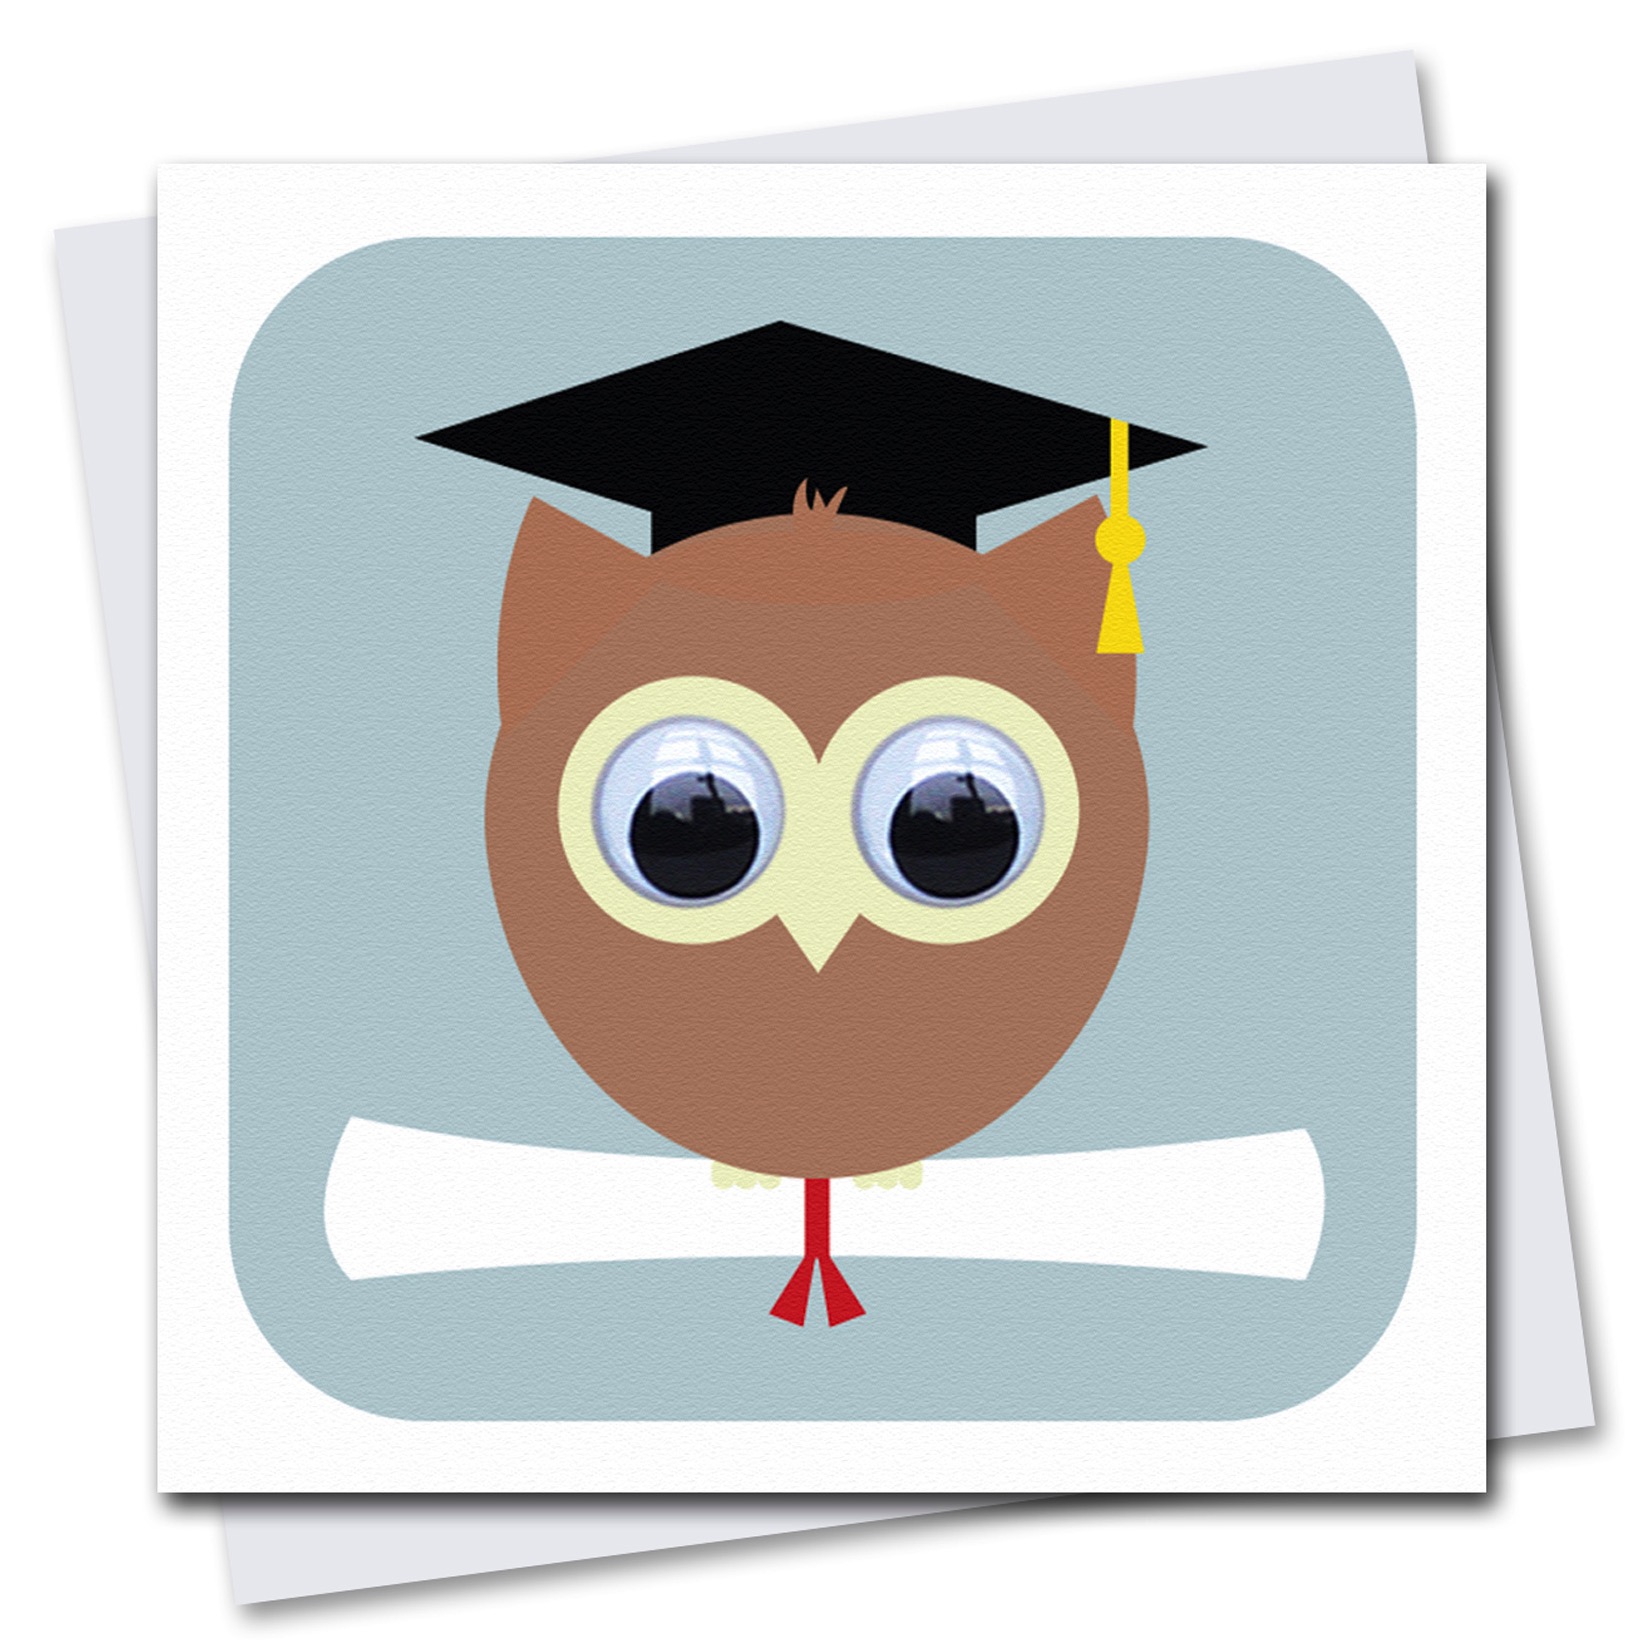 087-Wise-Owl-Graduation-Card-by-Stripey-Cats